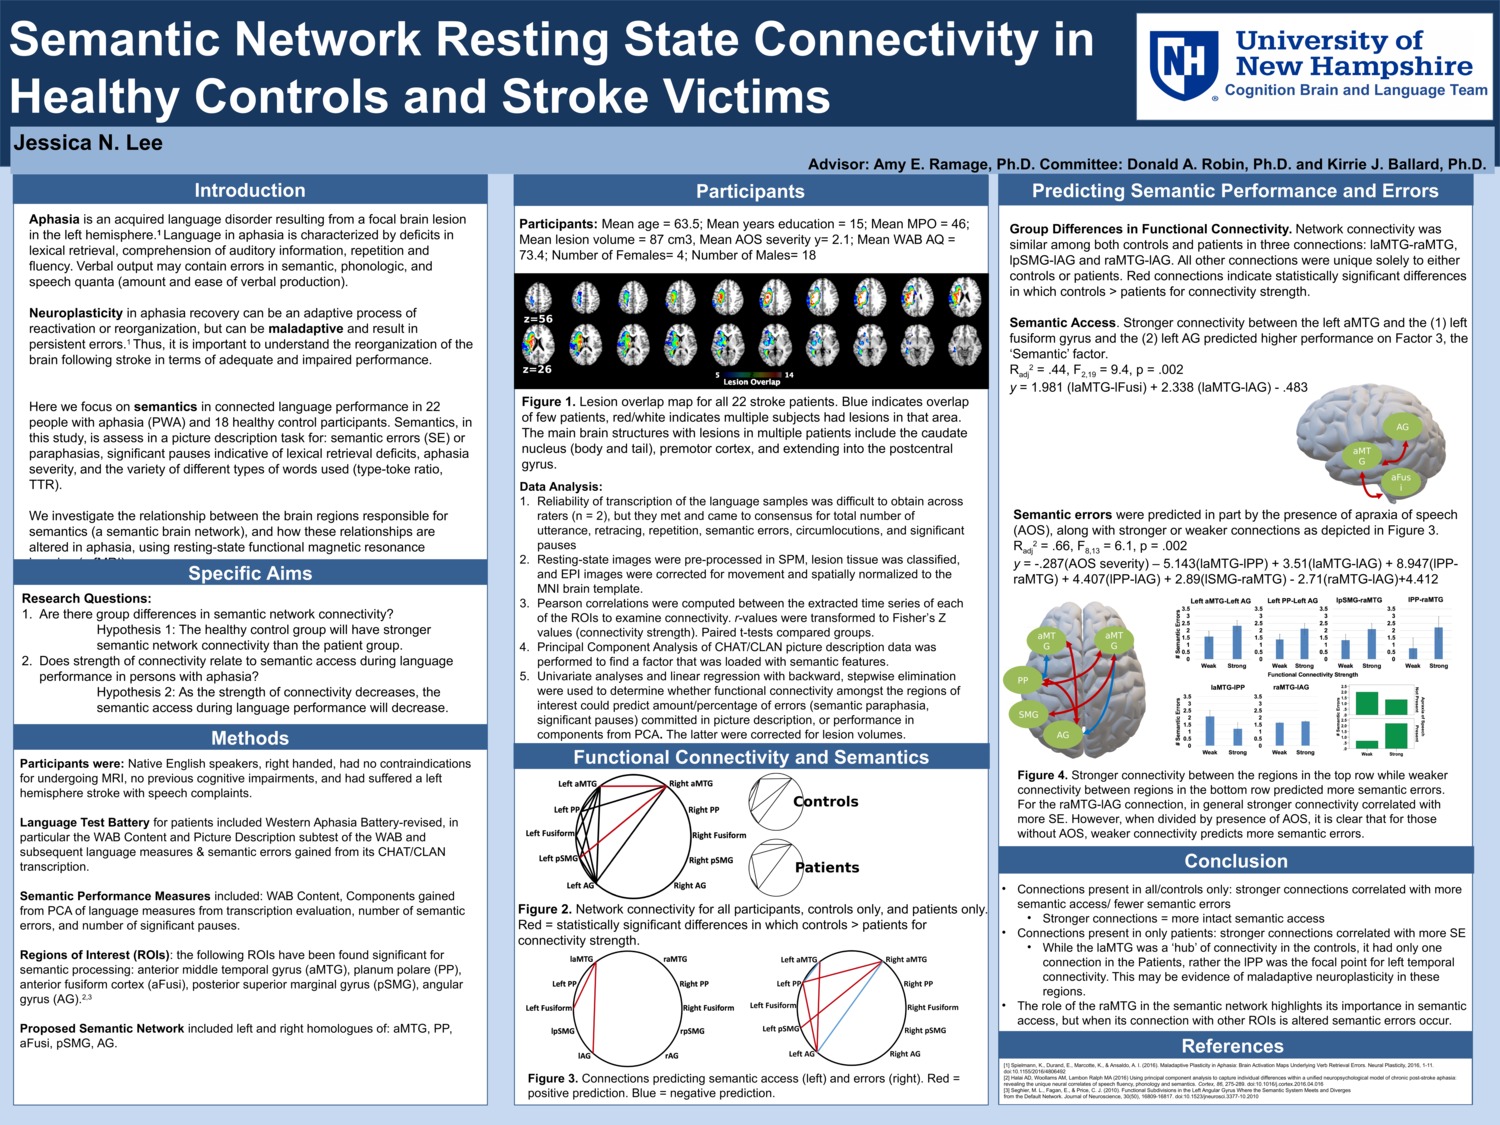 Semantic Network Connectivity In Healthy Controls And Stroke Victims by jnl1000